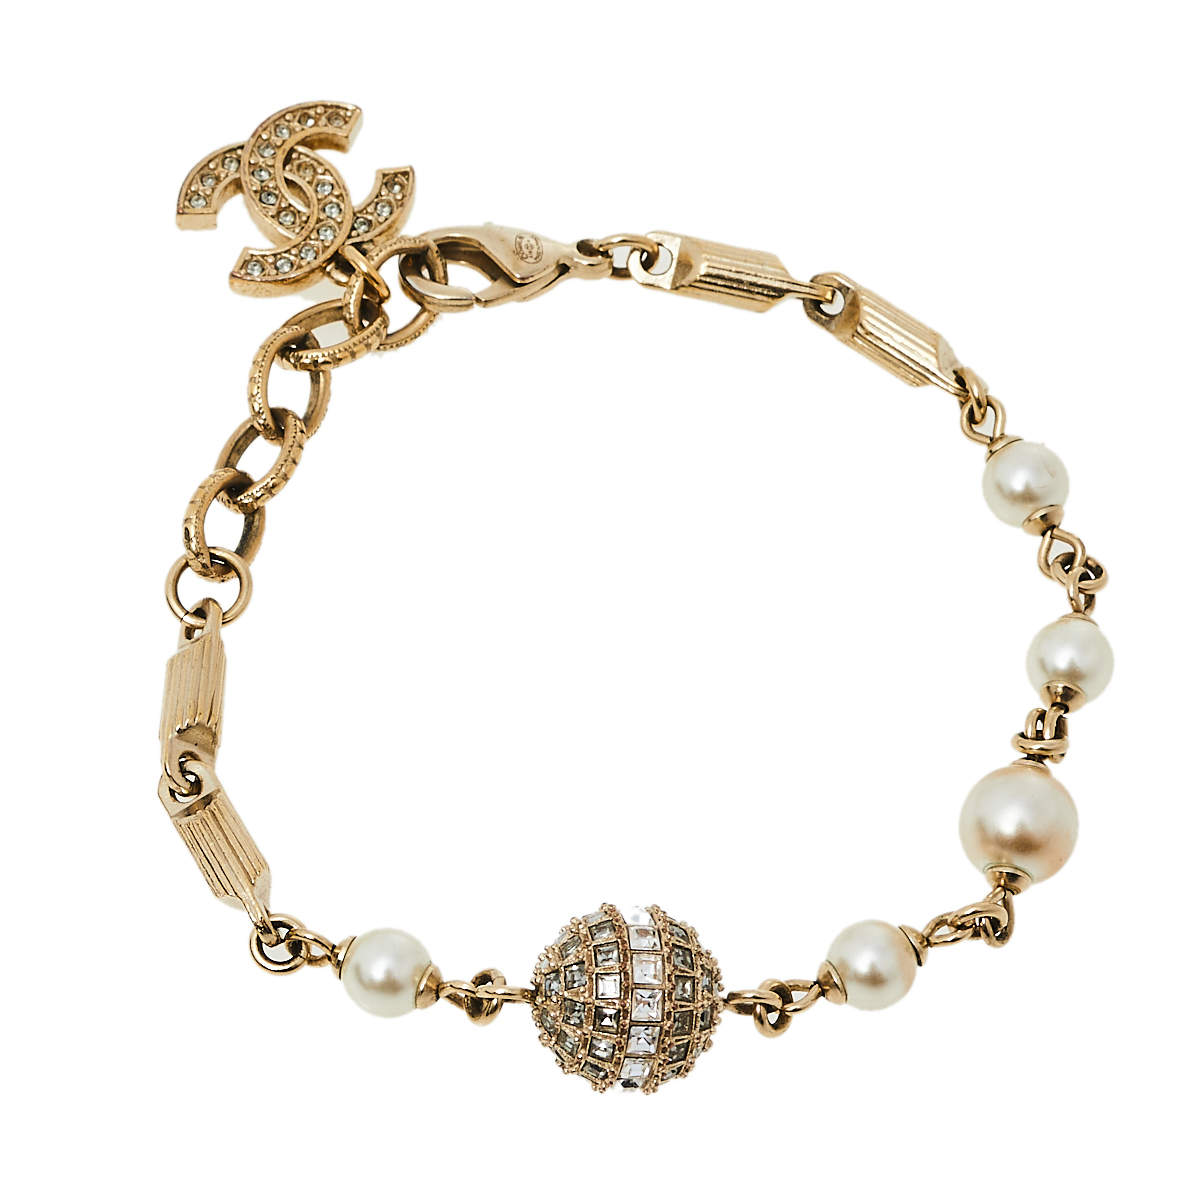 Chanel Gold Tone Crystal Ball and CC Charm Bracelet